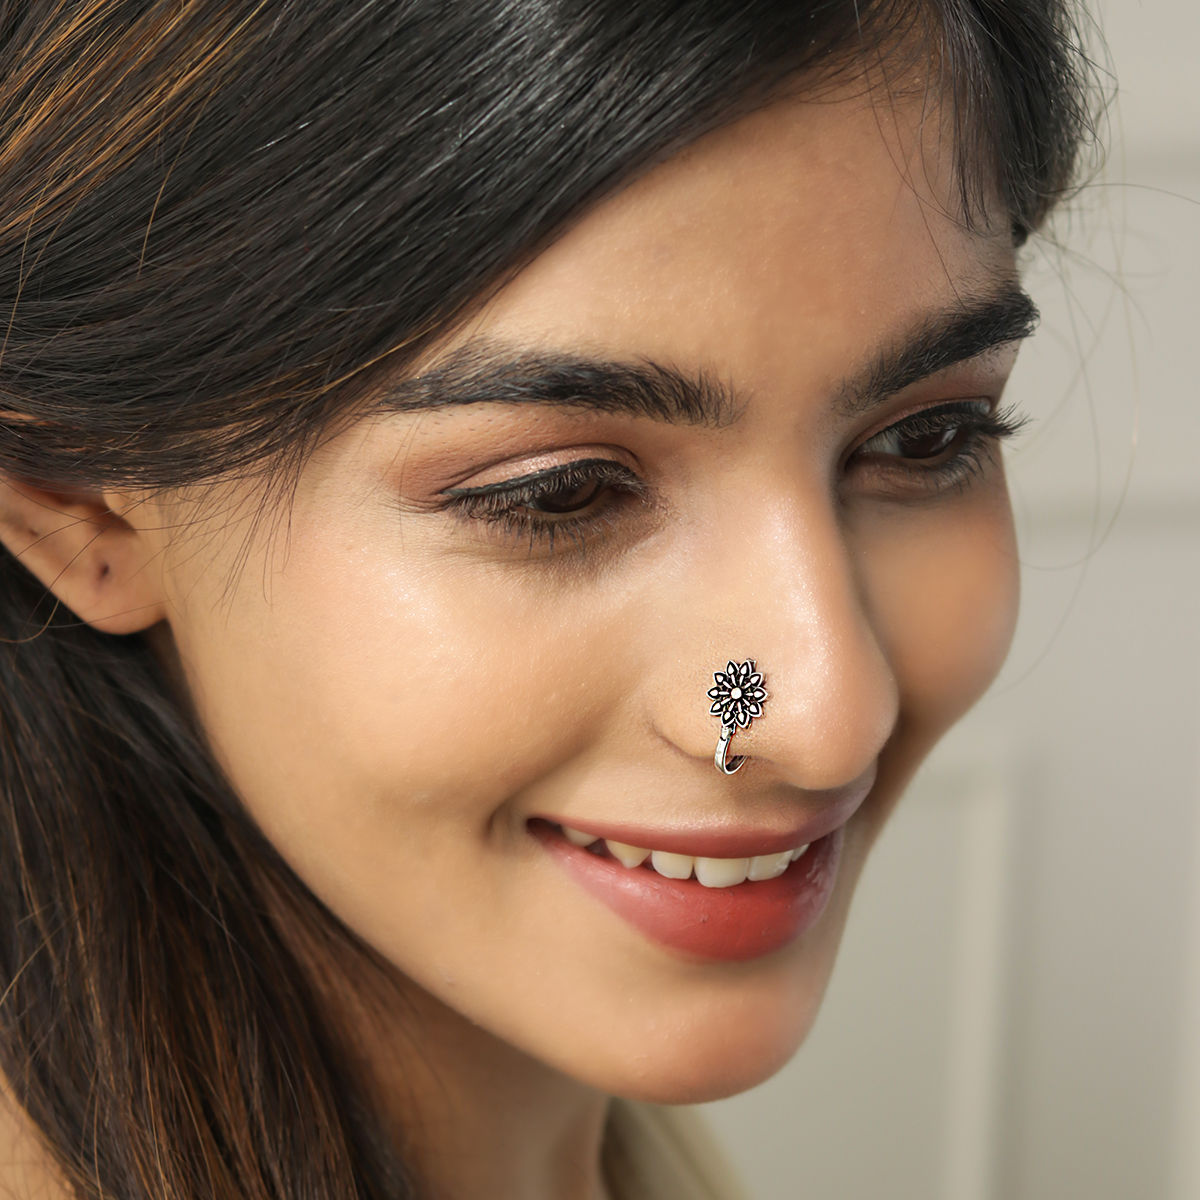 Oxidized Silver Plated Flower Design Nose Pin/ Nose Clip/ Adjustable Nose  Pin/ Body Jewellery/ Nose Ring & Stud/ Bollywood Trending Nose Pin - Etsy |  Body jewelry nose, Nose ring stud, Nose ring